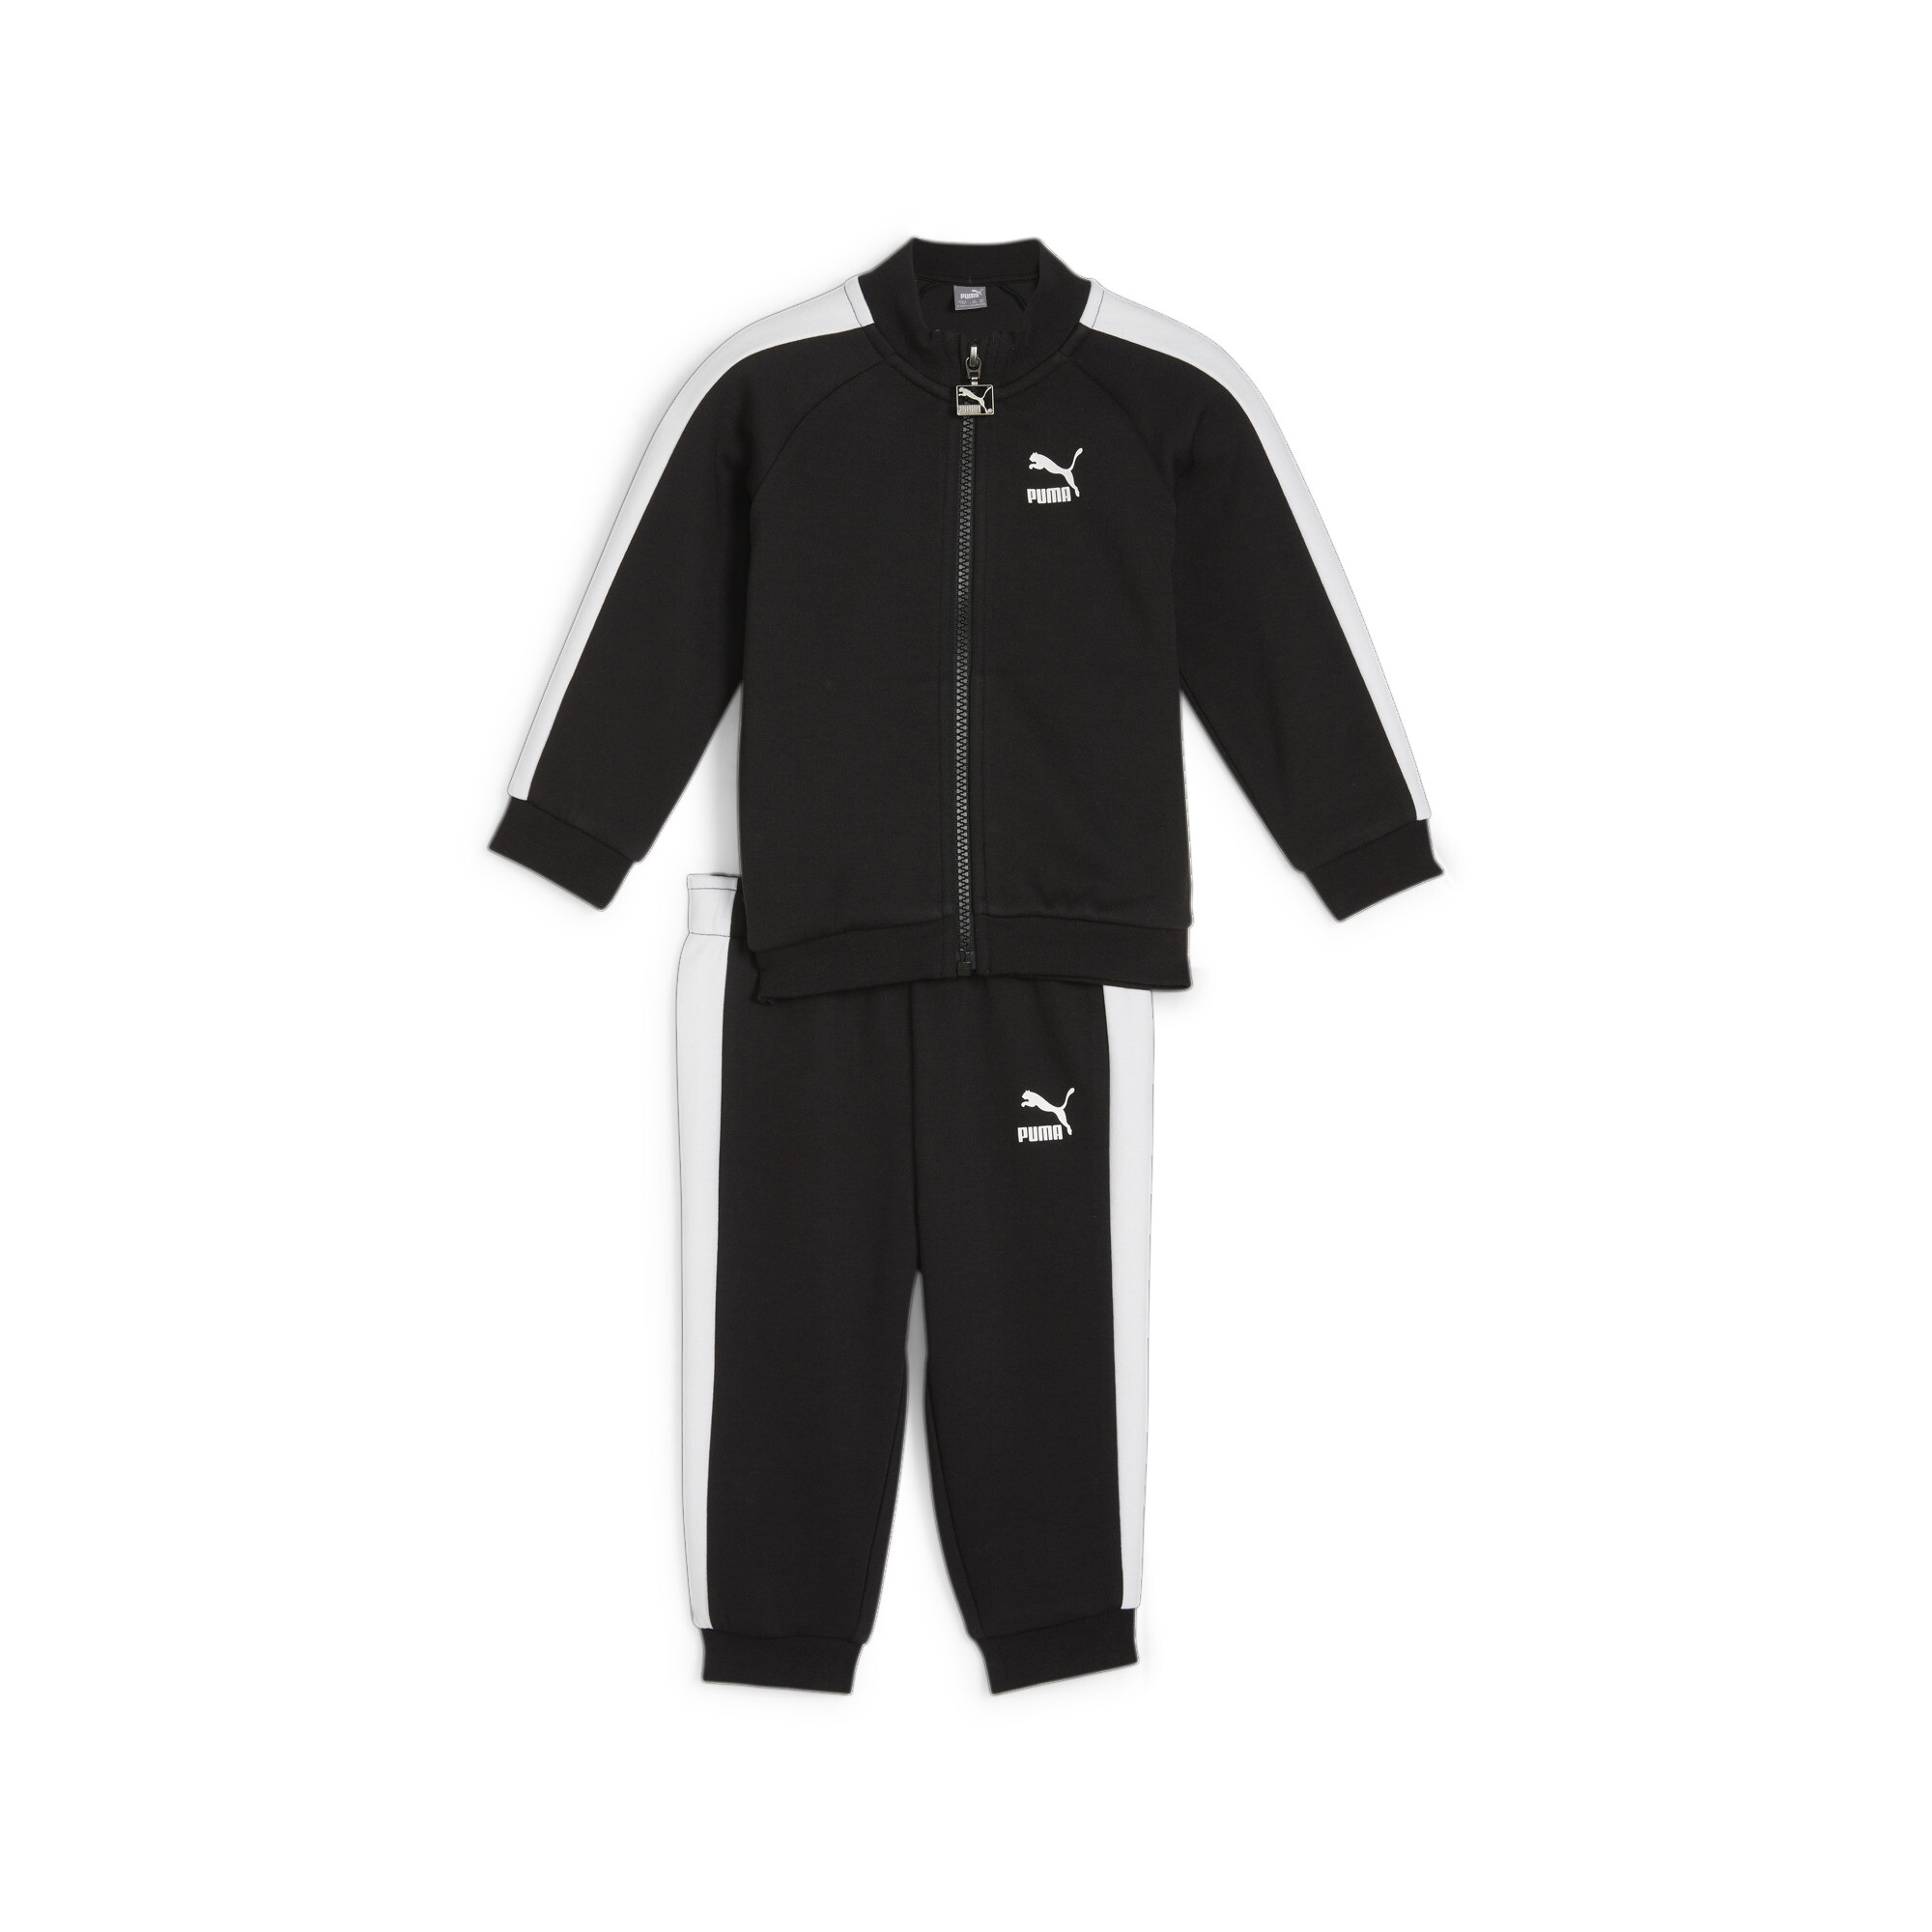 Kids' PUMA MINICATS T7 ICONIC Baby Tracksuit Set In 10 - Black, Size 2-4 Months